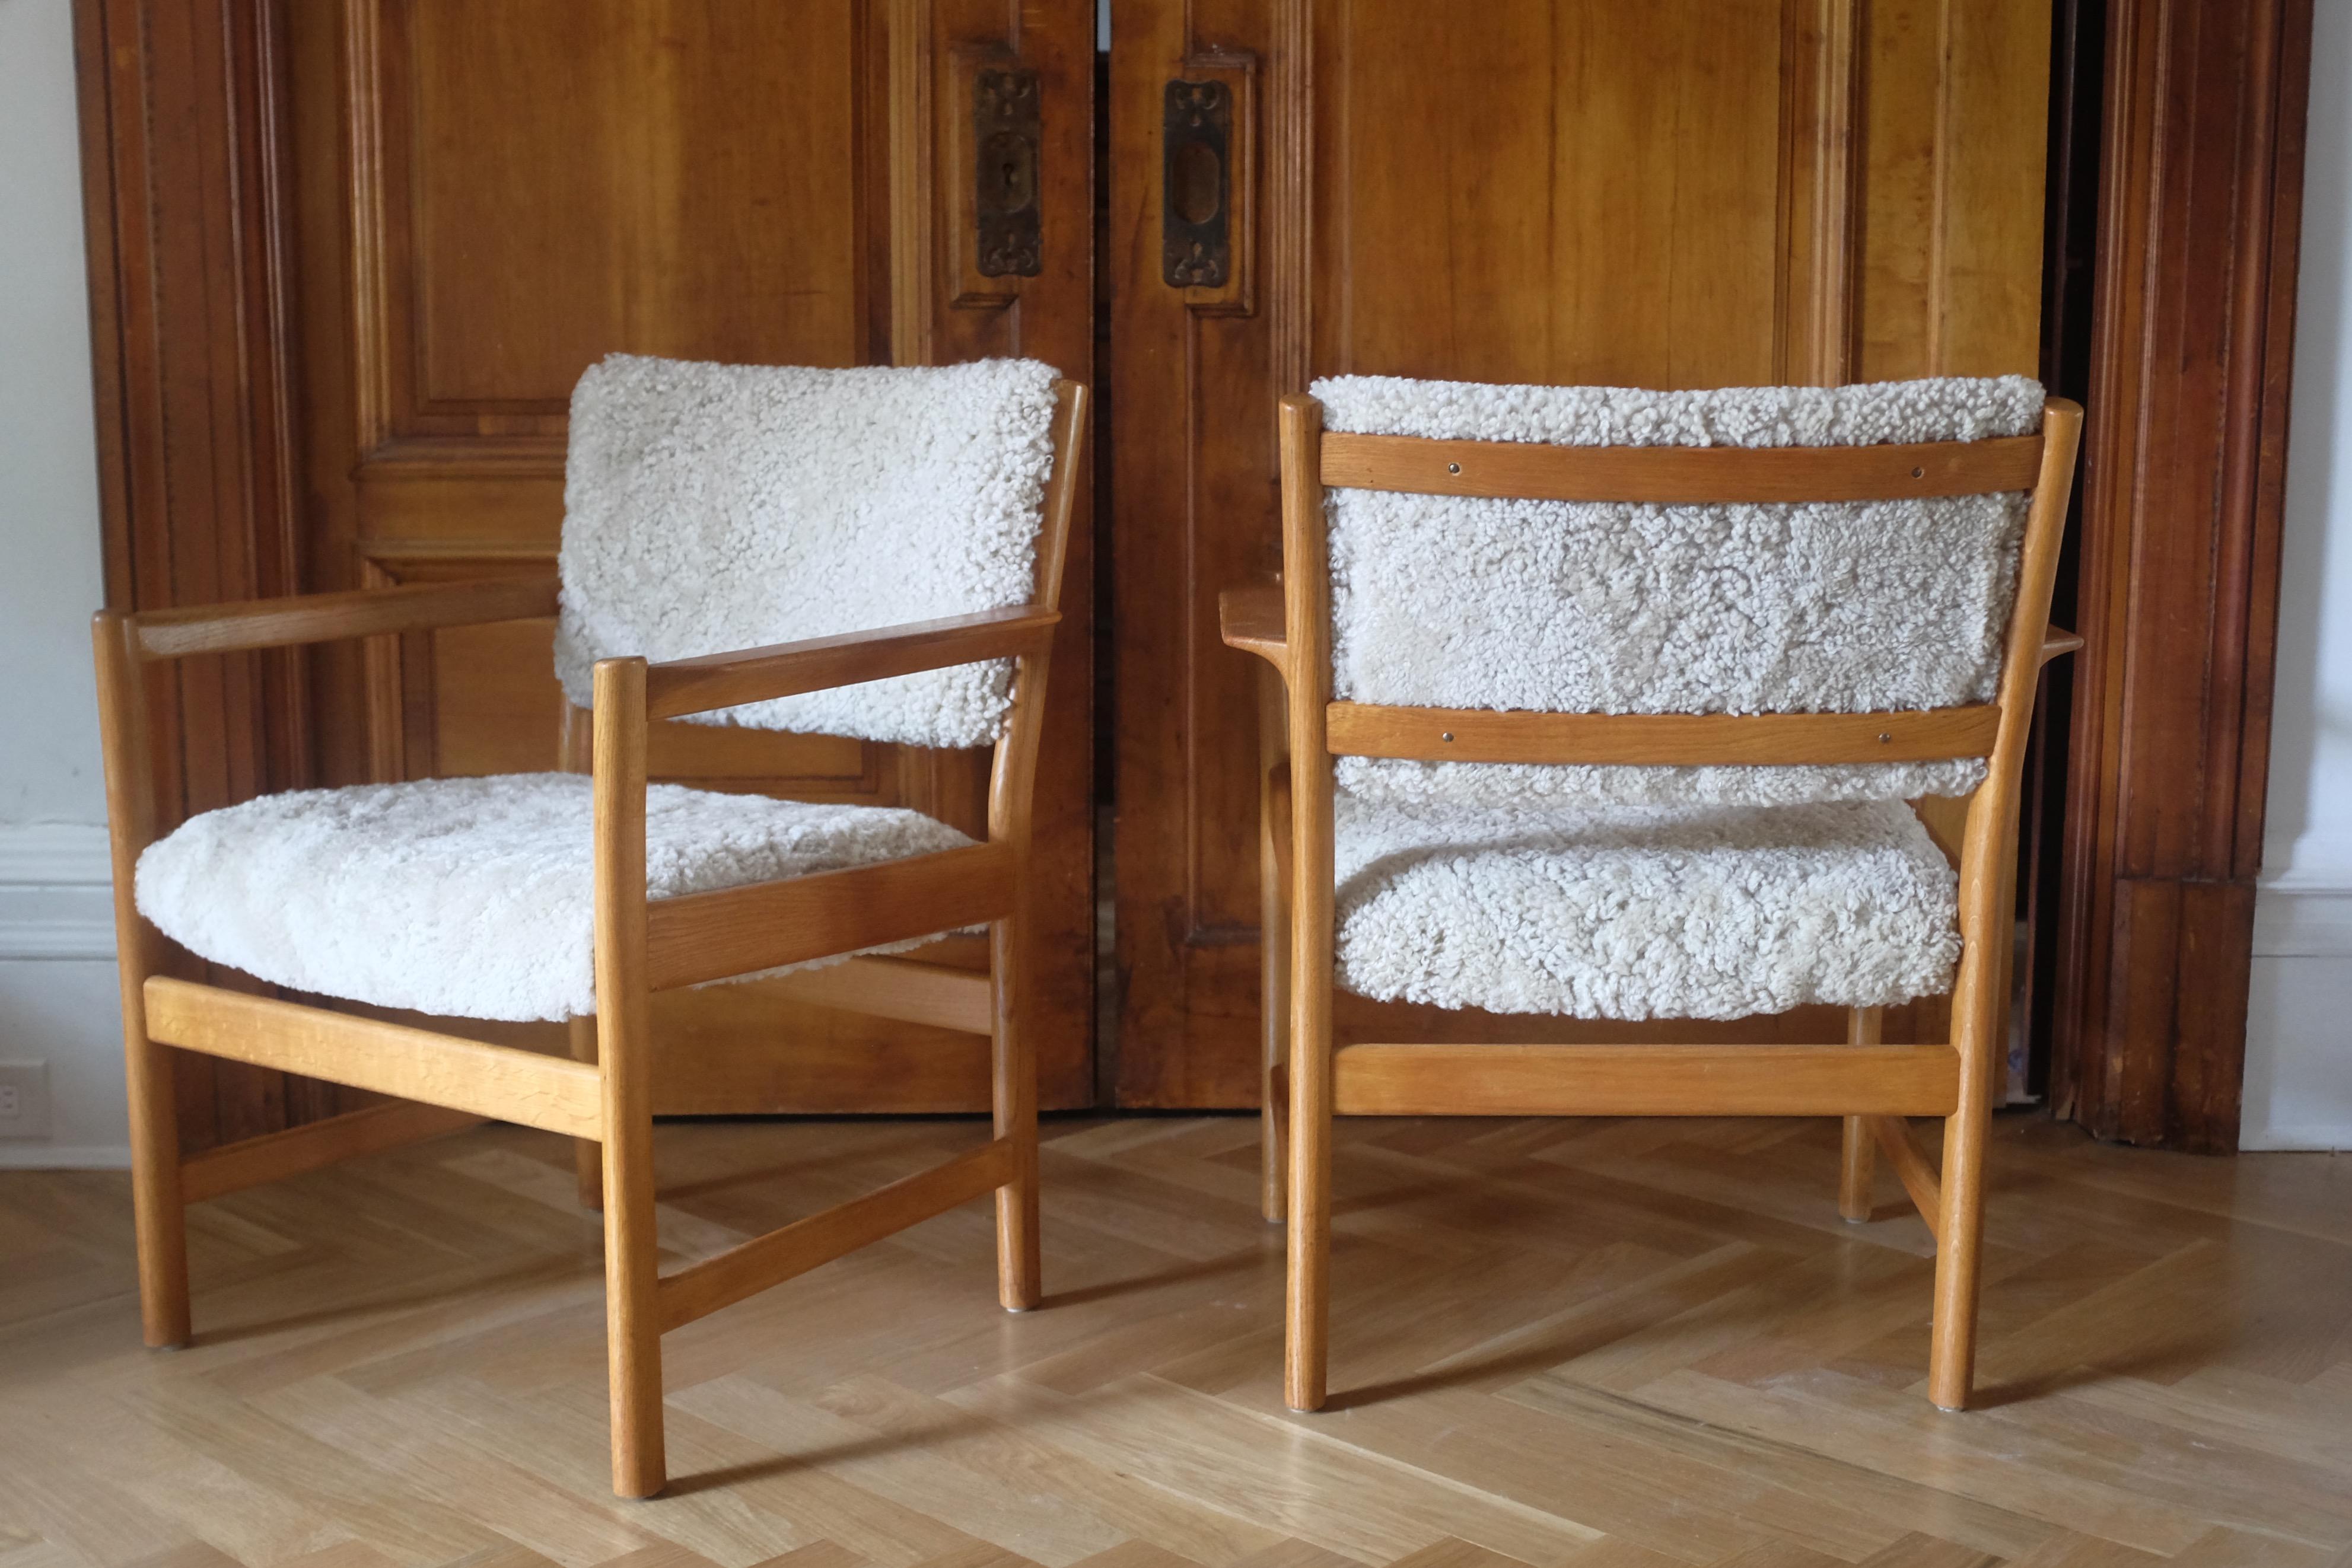 Gorgeous pair of 1960's armchairs by the iconic Swedish mid-century designer Alf Svensson for Bjästa Snickerifabrik. Made of oak wood they are both on great vintage condition and newly upholstered in Scandilock sheepskin. 

Country: